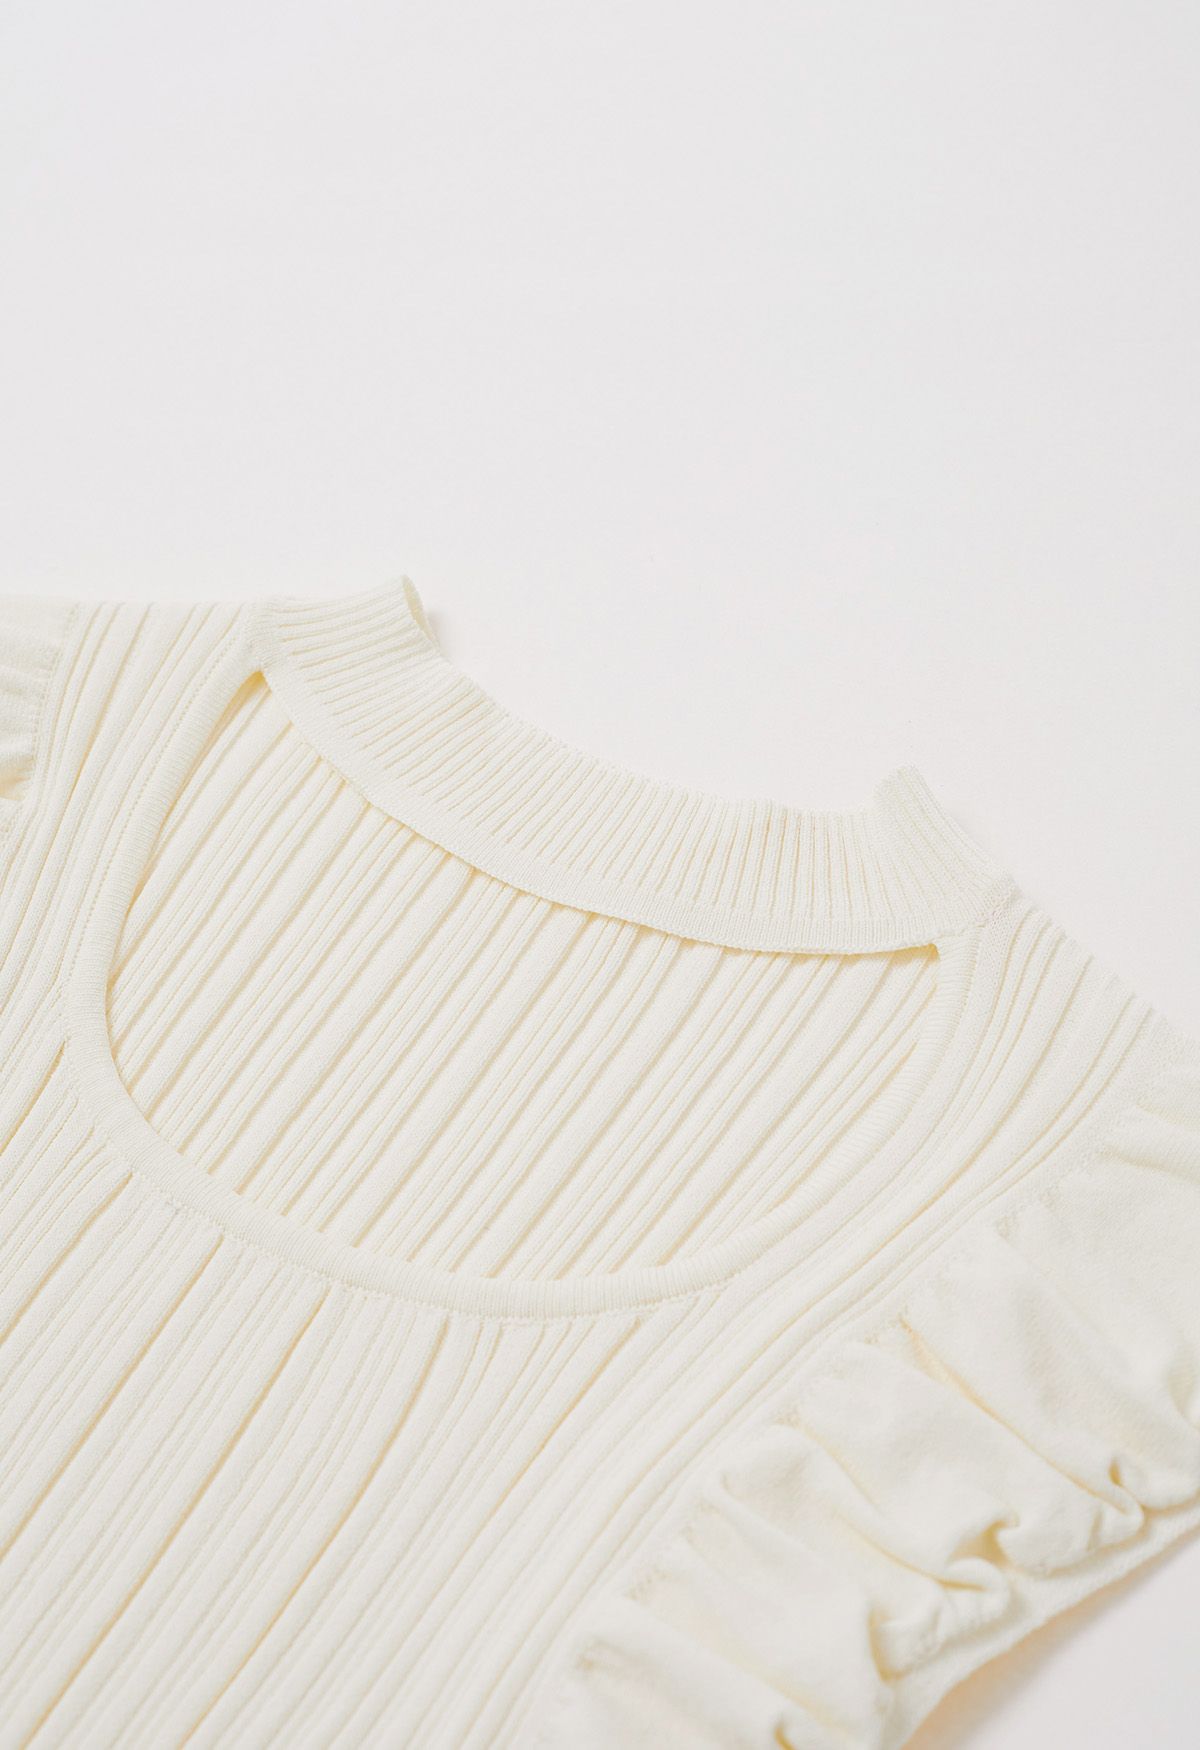 Choker Neck Ruched Cap Sleeves Knit Top in Cream